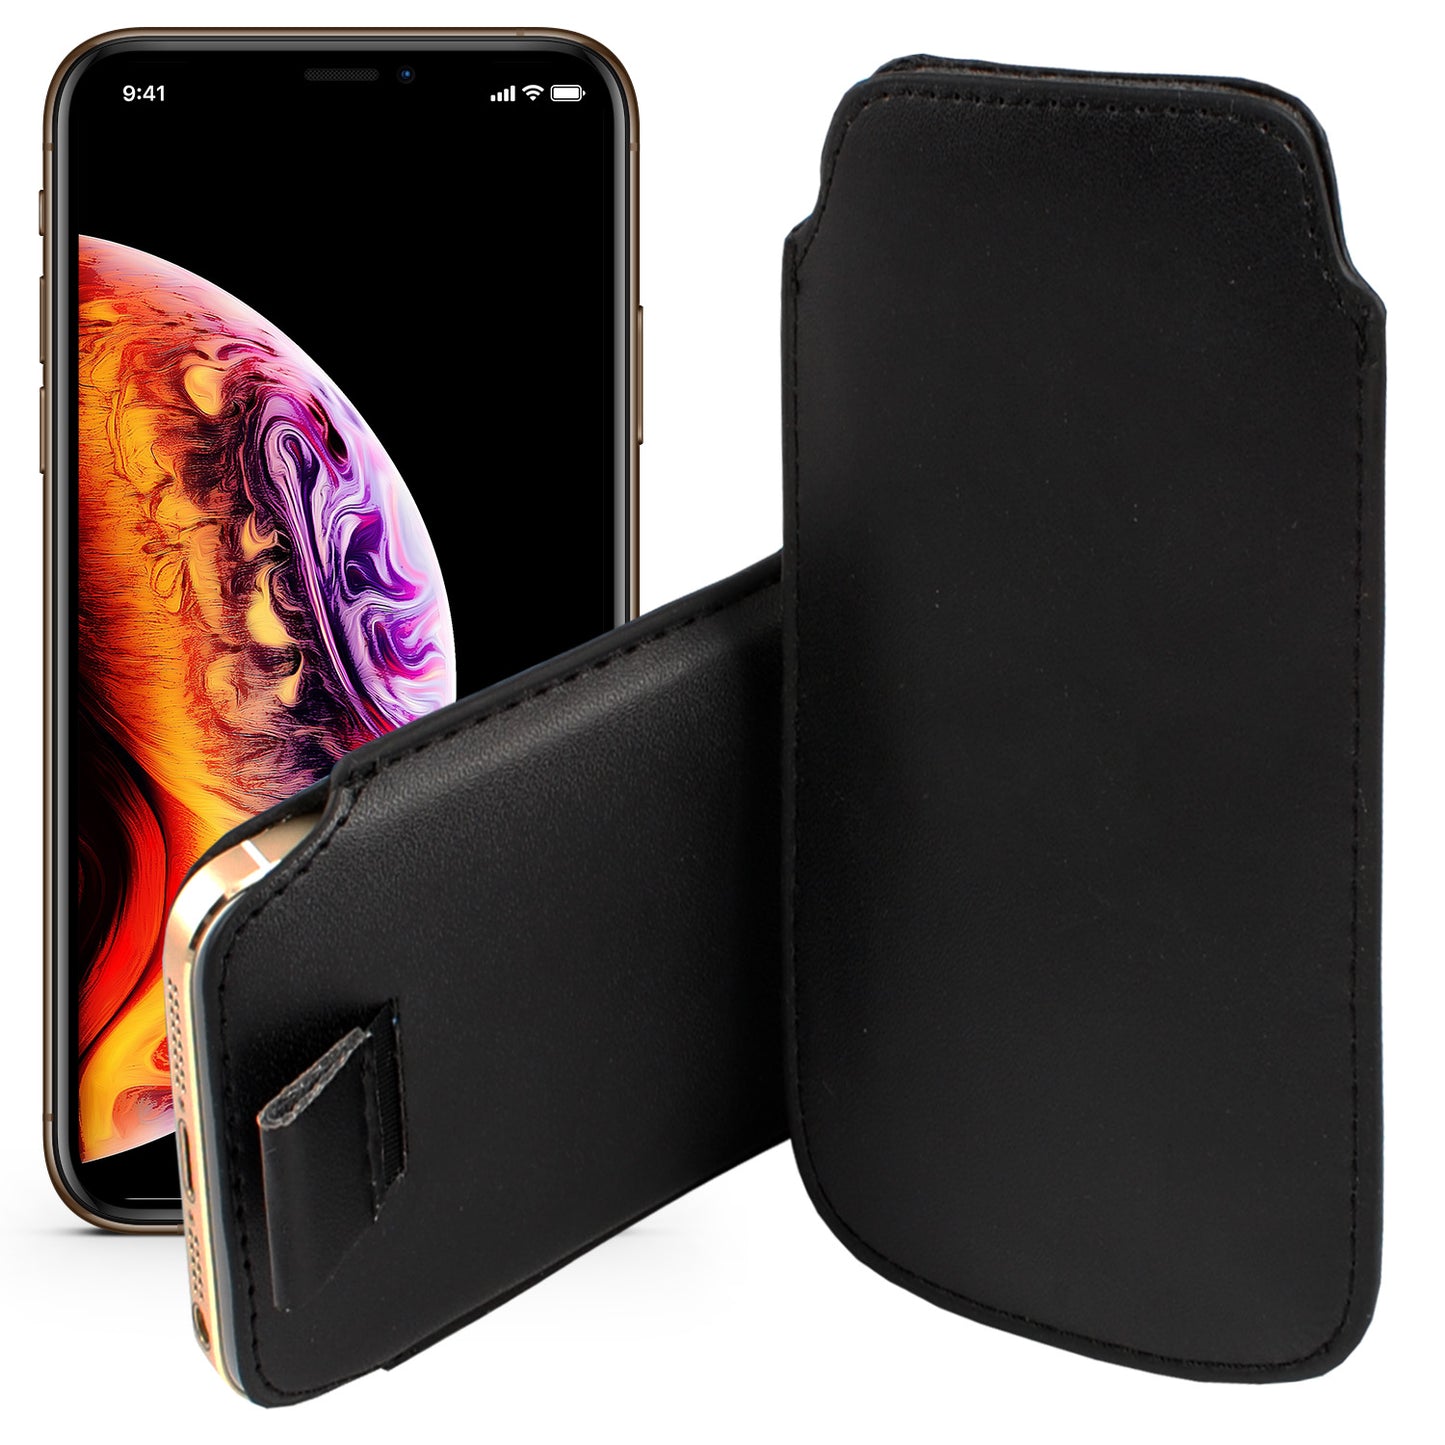 MEZON Apple iPhone XS (5.8") Black Pull Tab Slim Faux Leather Pouch Sleeve Case Wireless Charging Compatible (iPhone XS, Black)